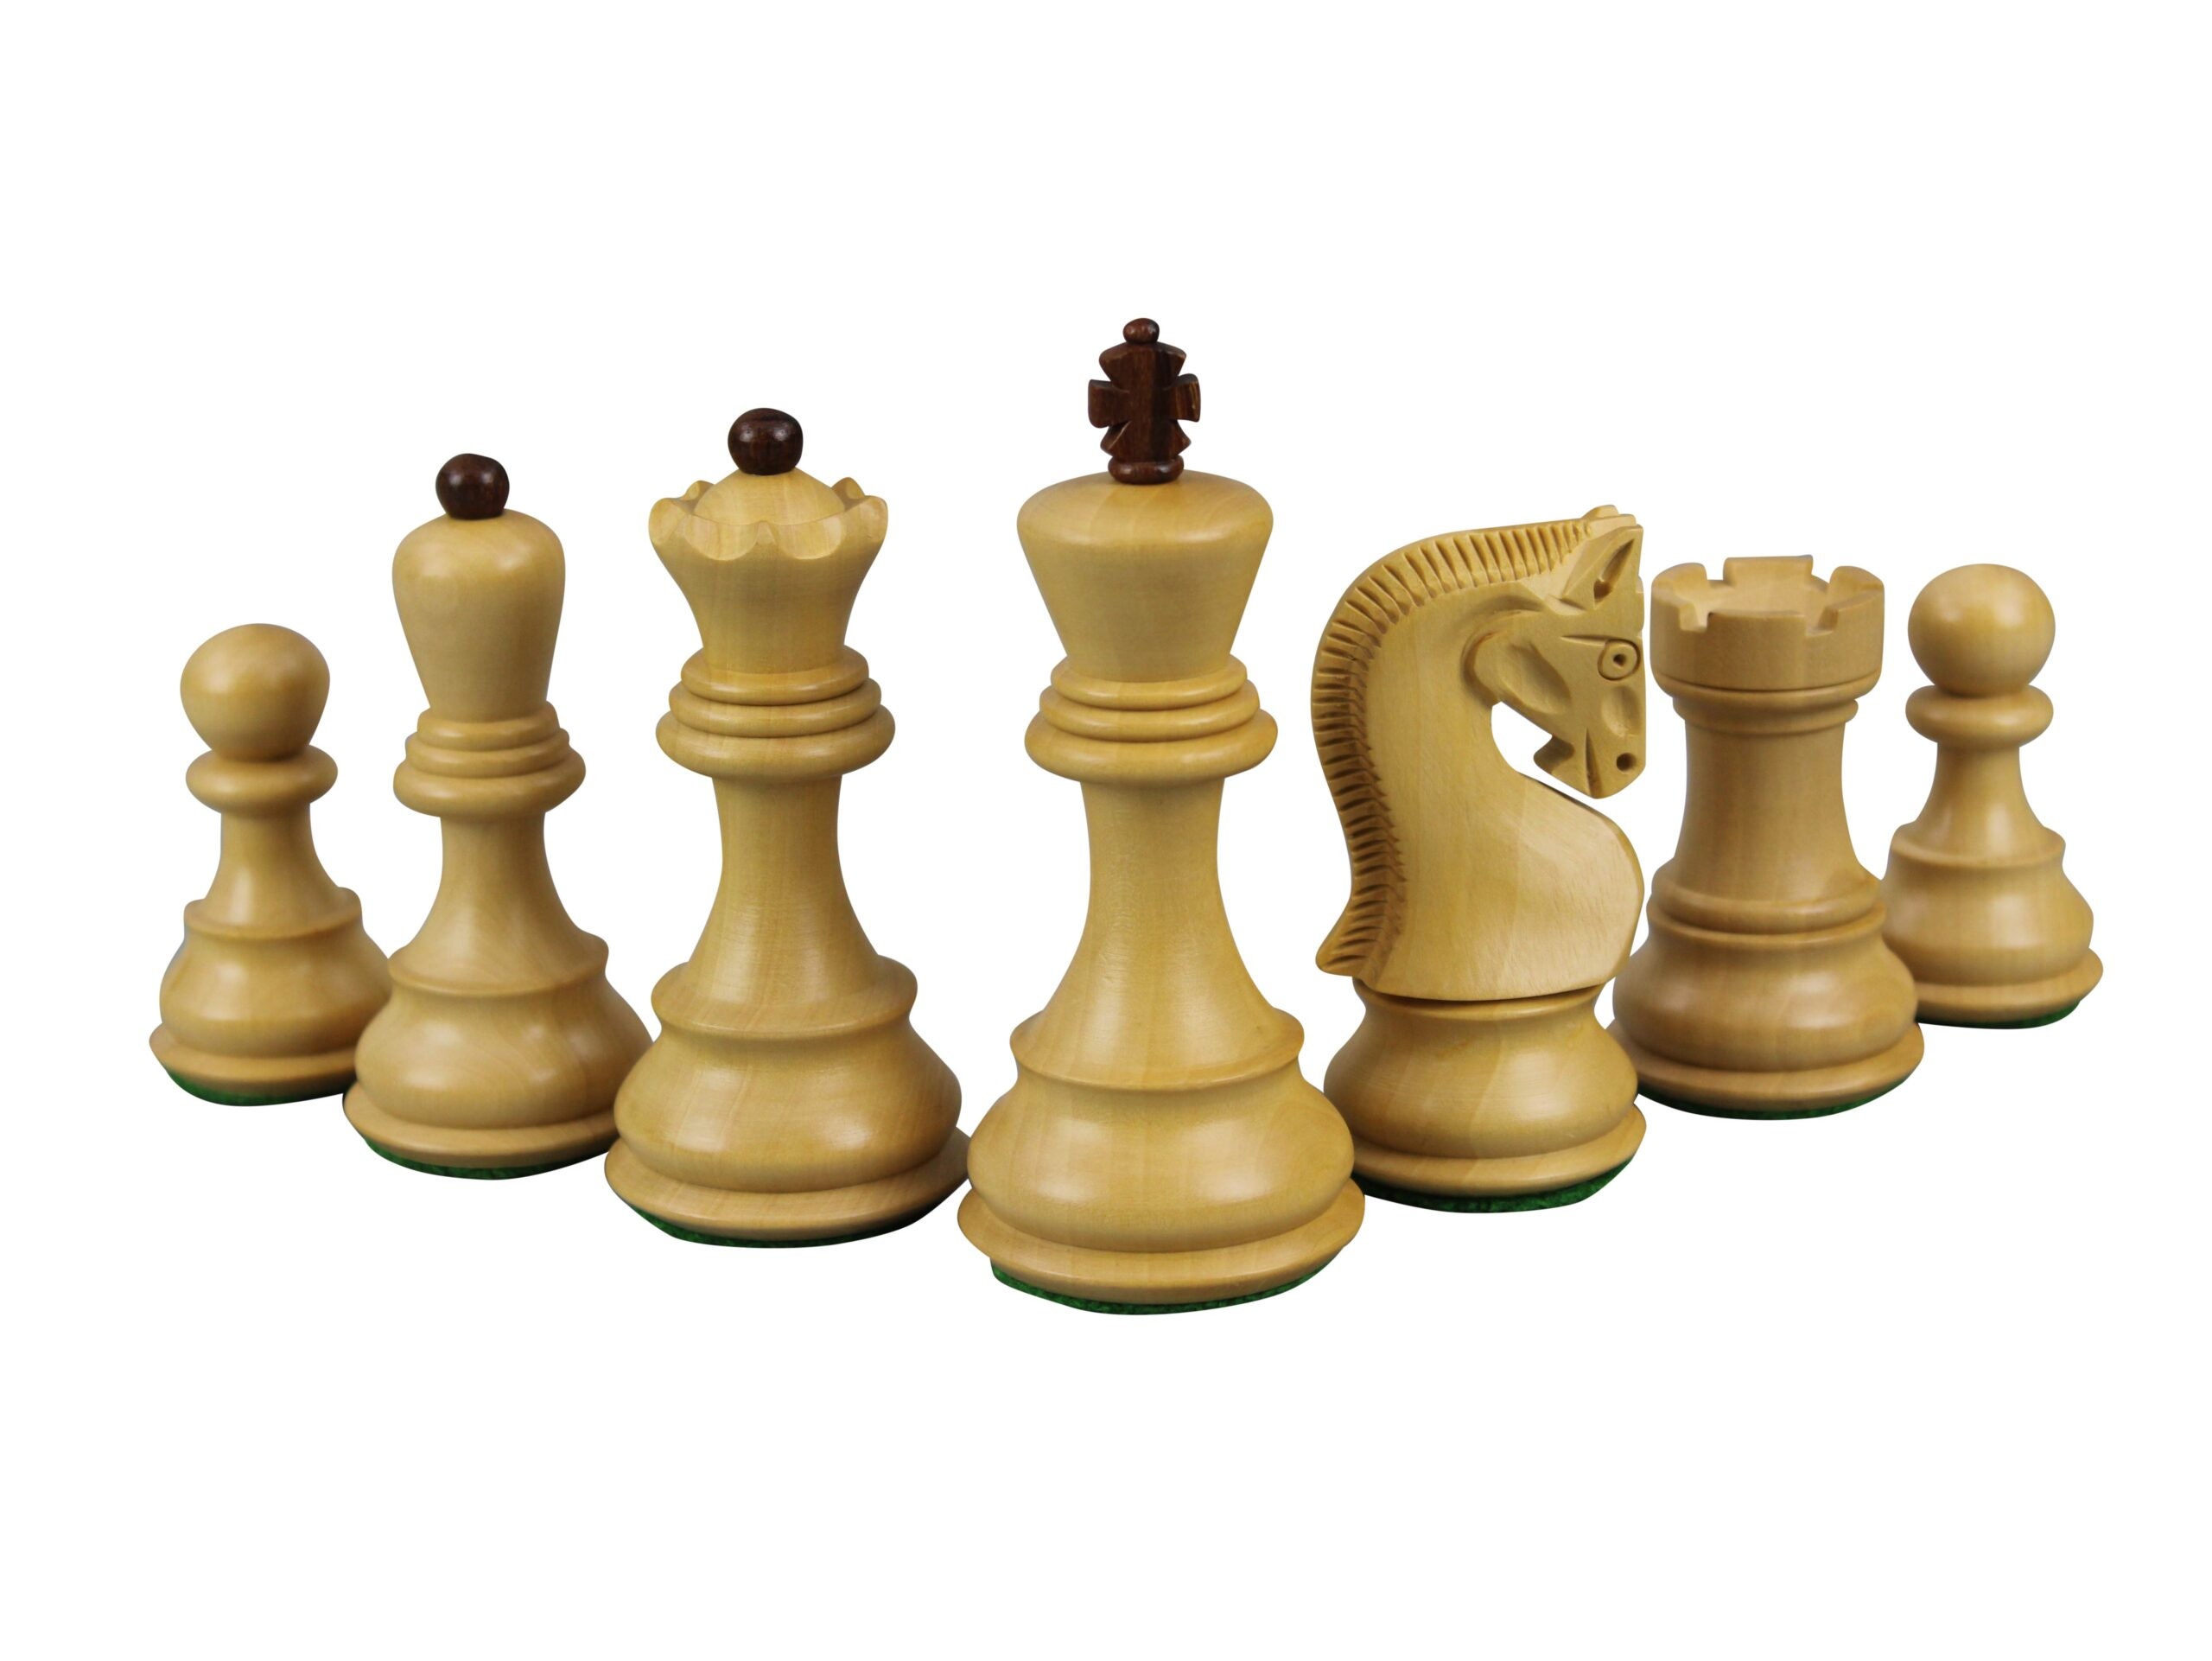 How To Play The Queen's Gambit Move? I Chessgammon